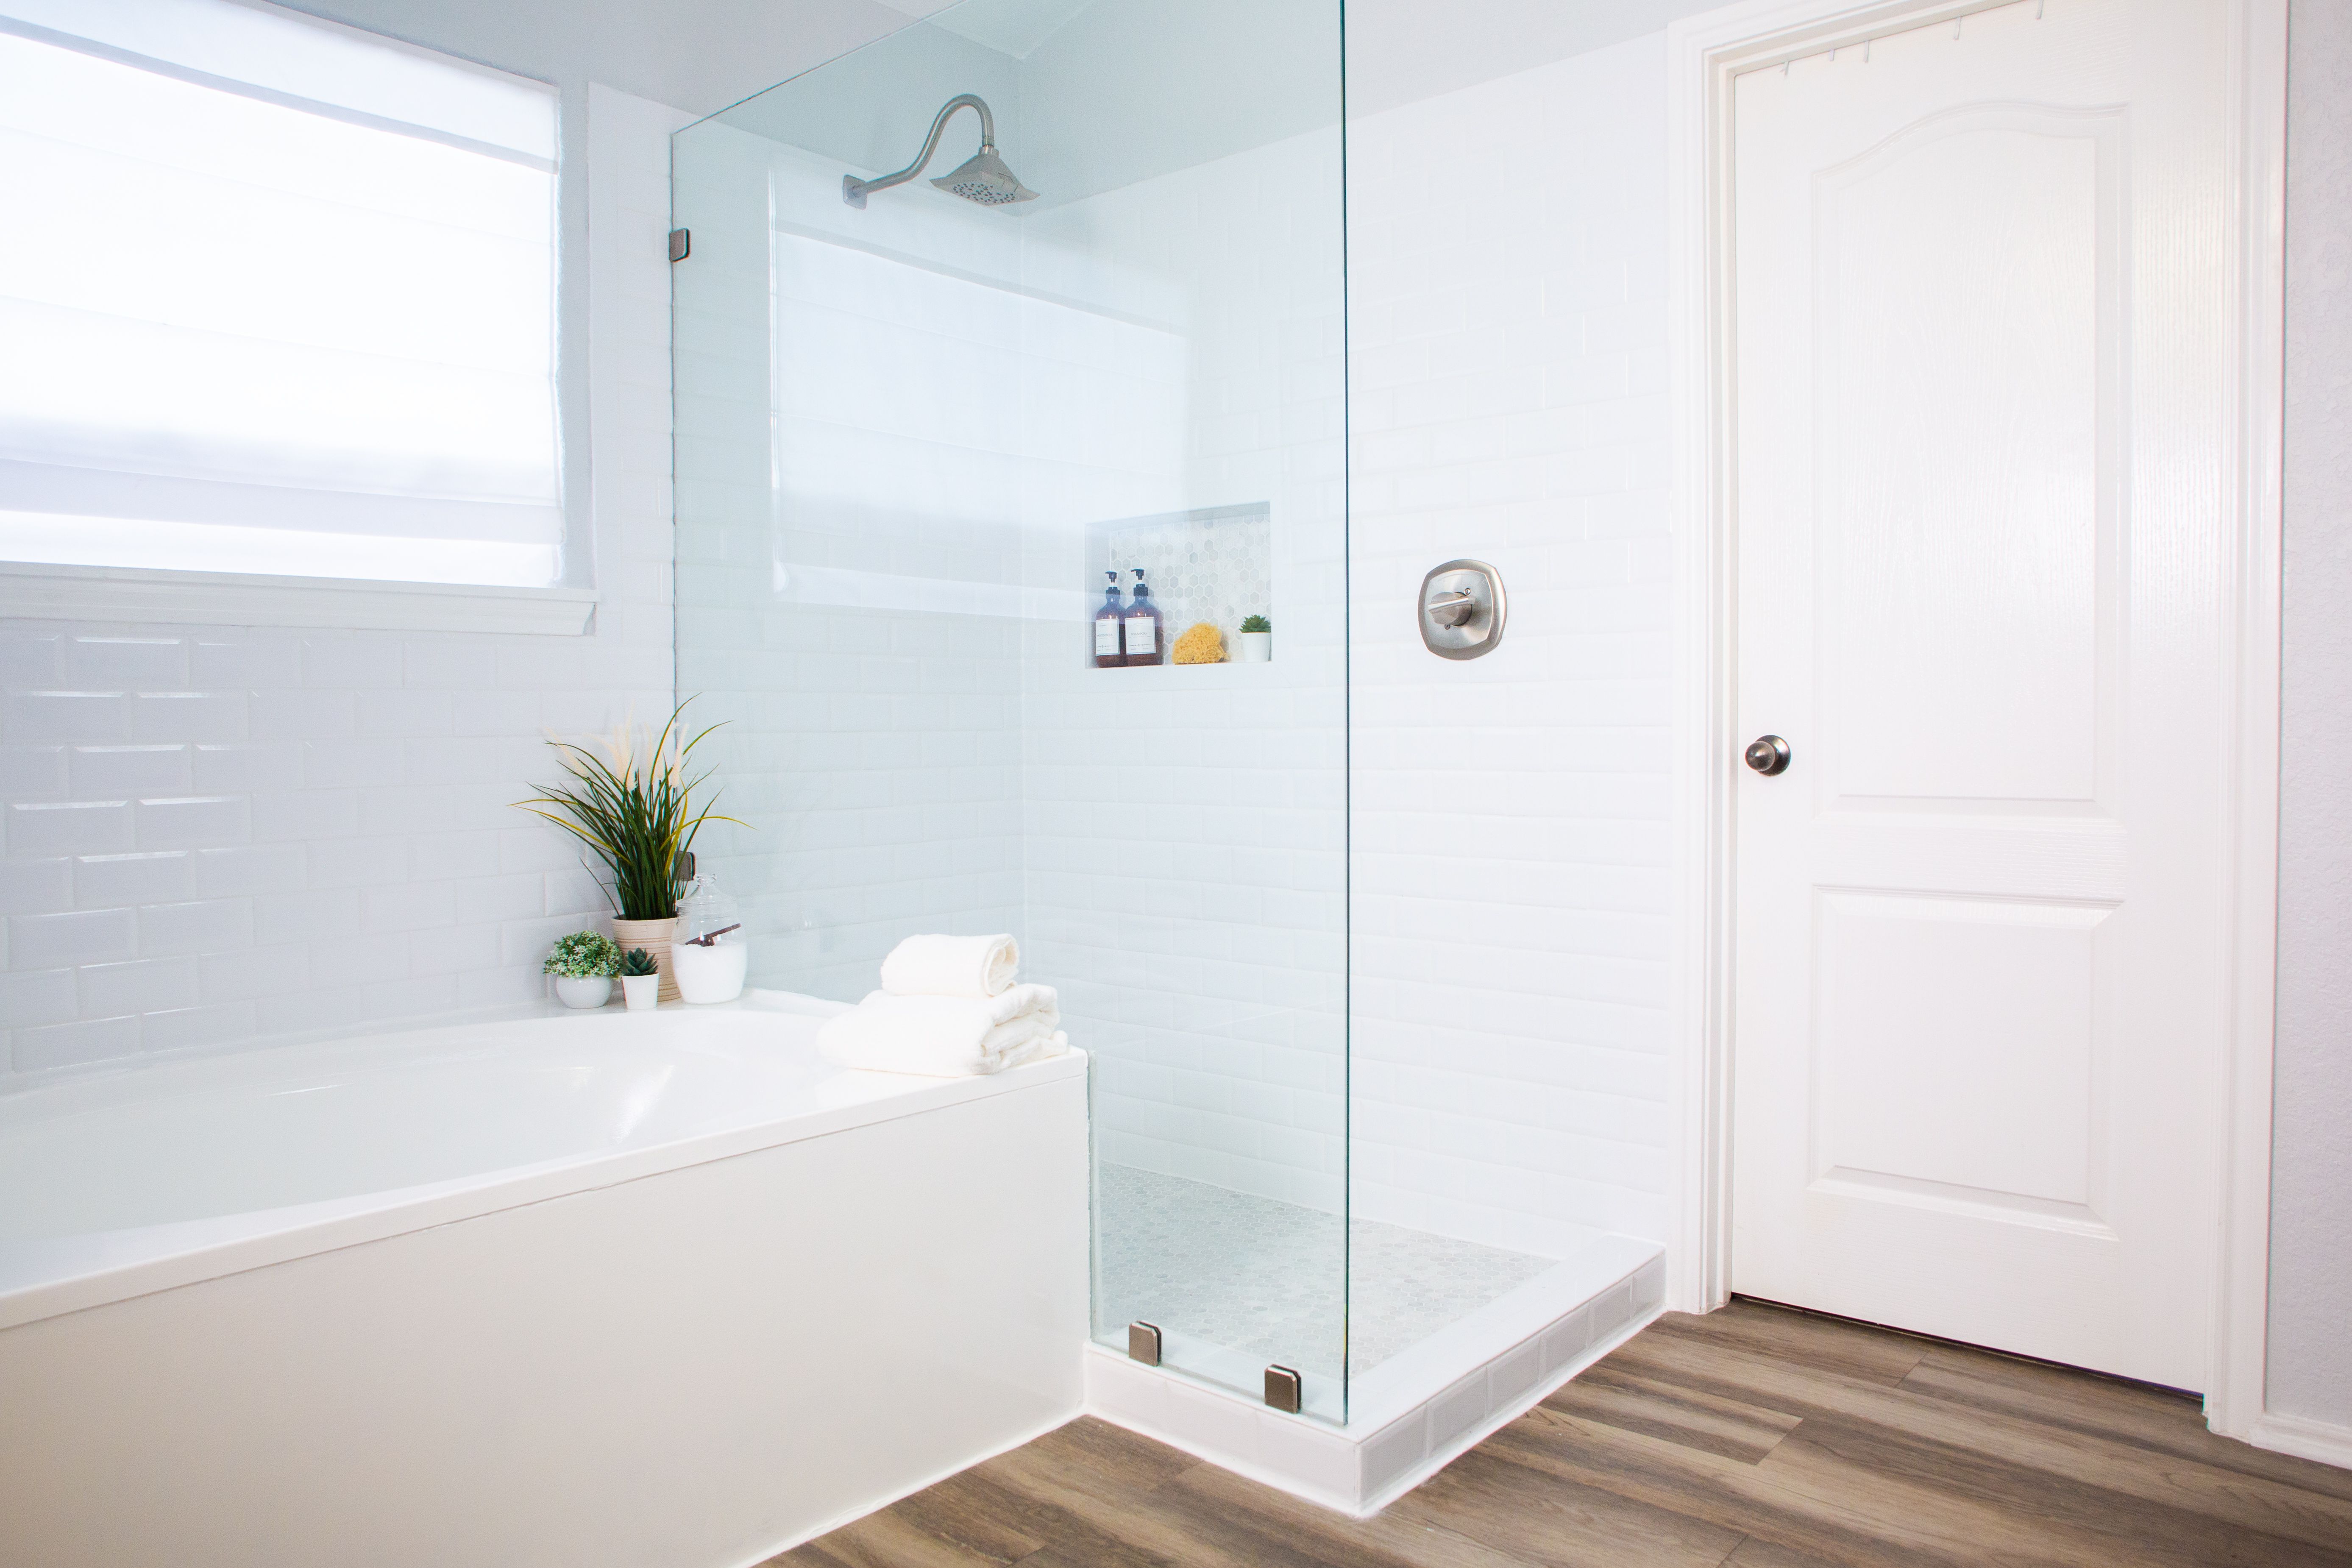 9 Shower Ideas That Work for Any Bathroom